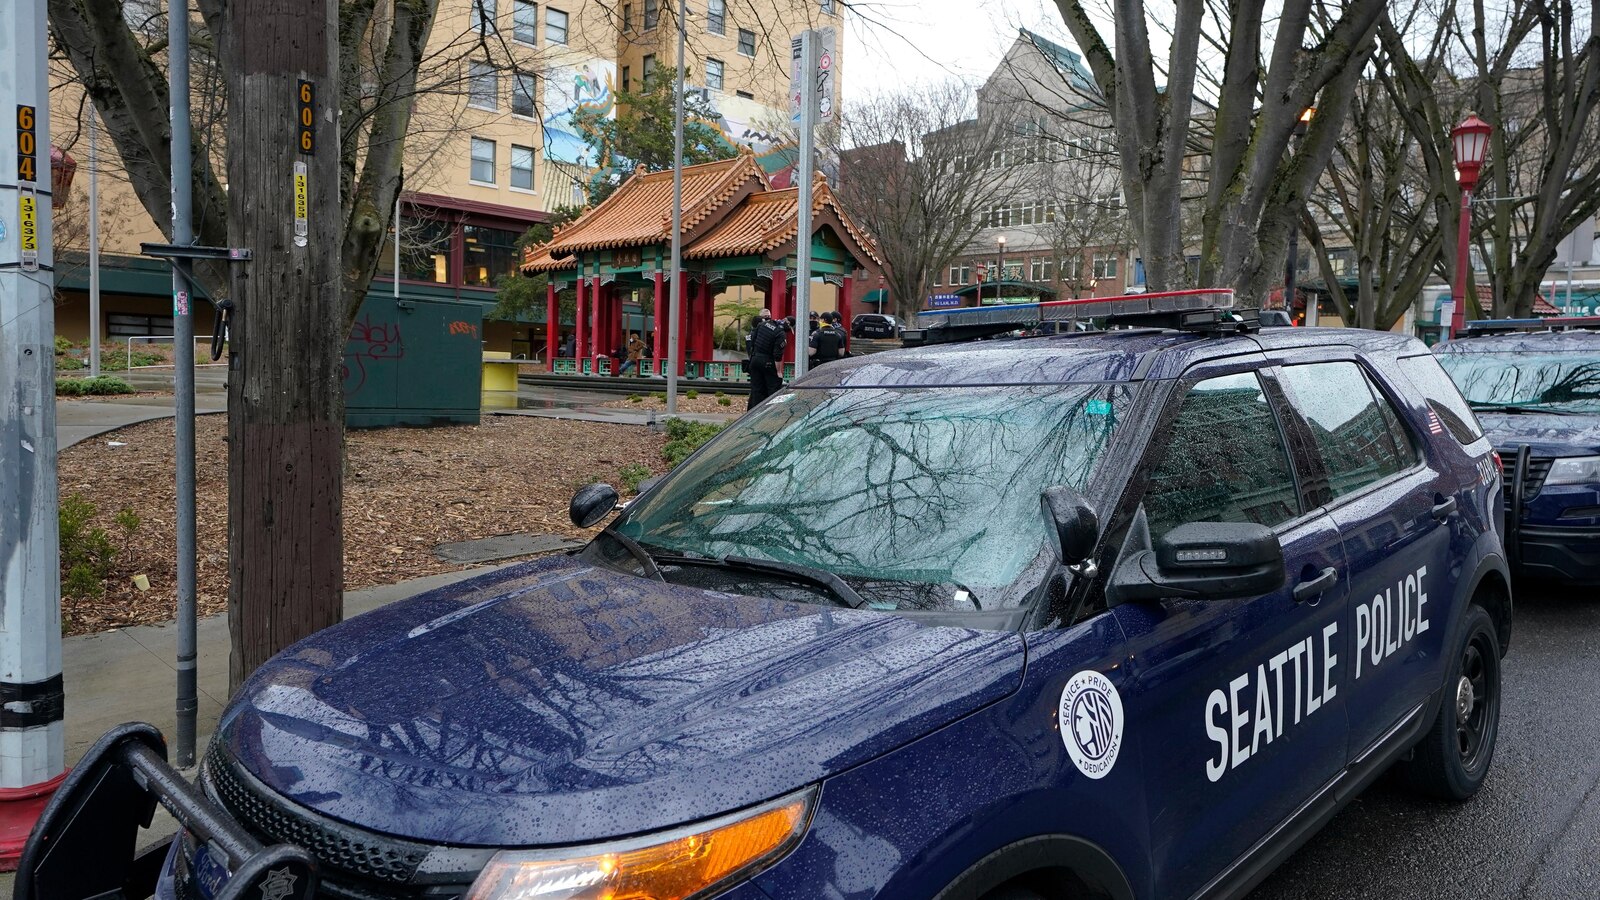 Seattle police officer terminated for making racist comments while off-duty